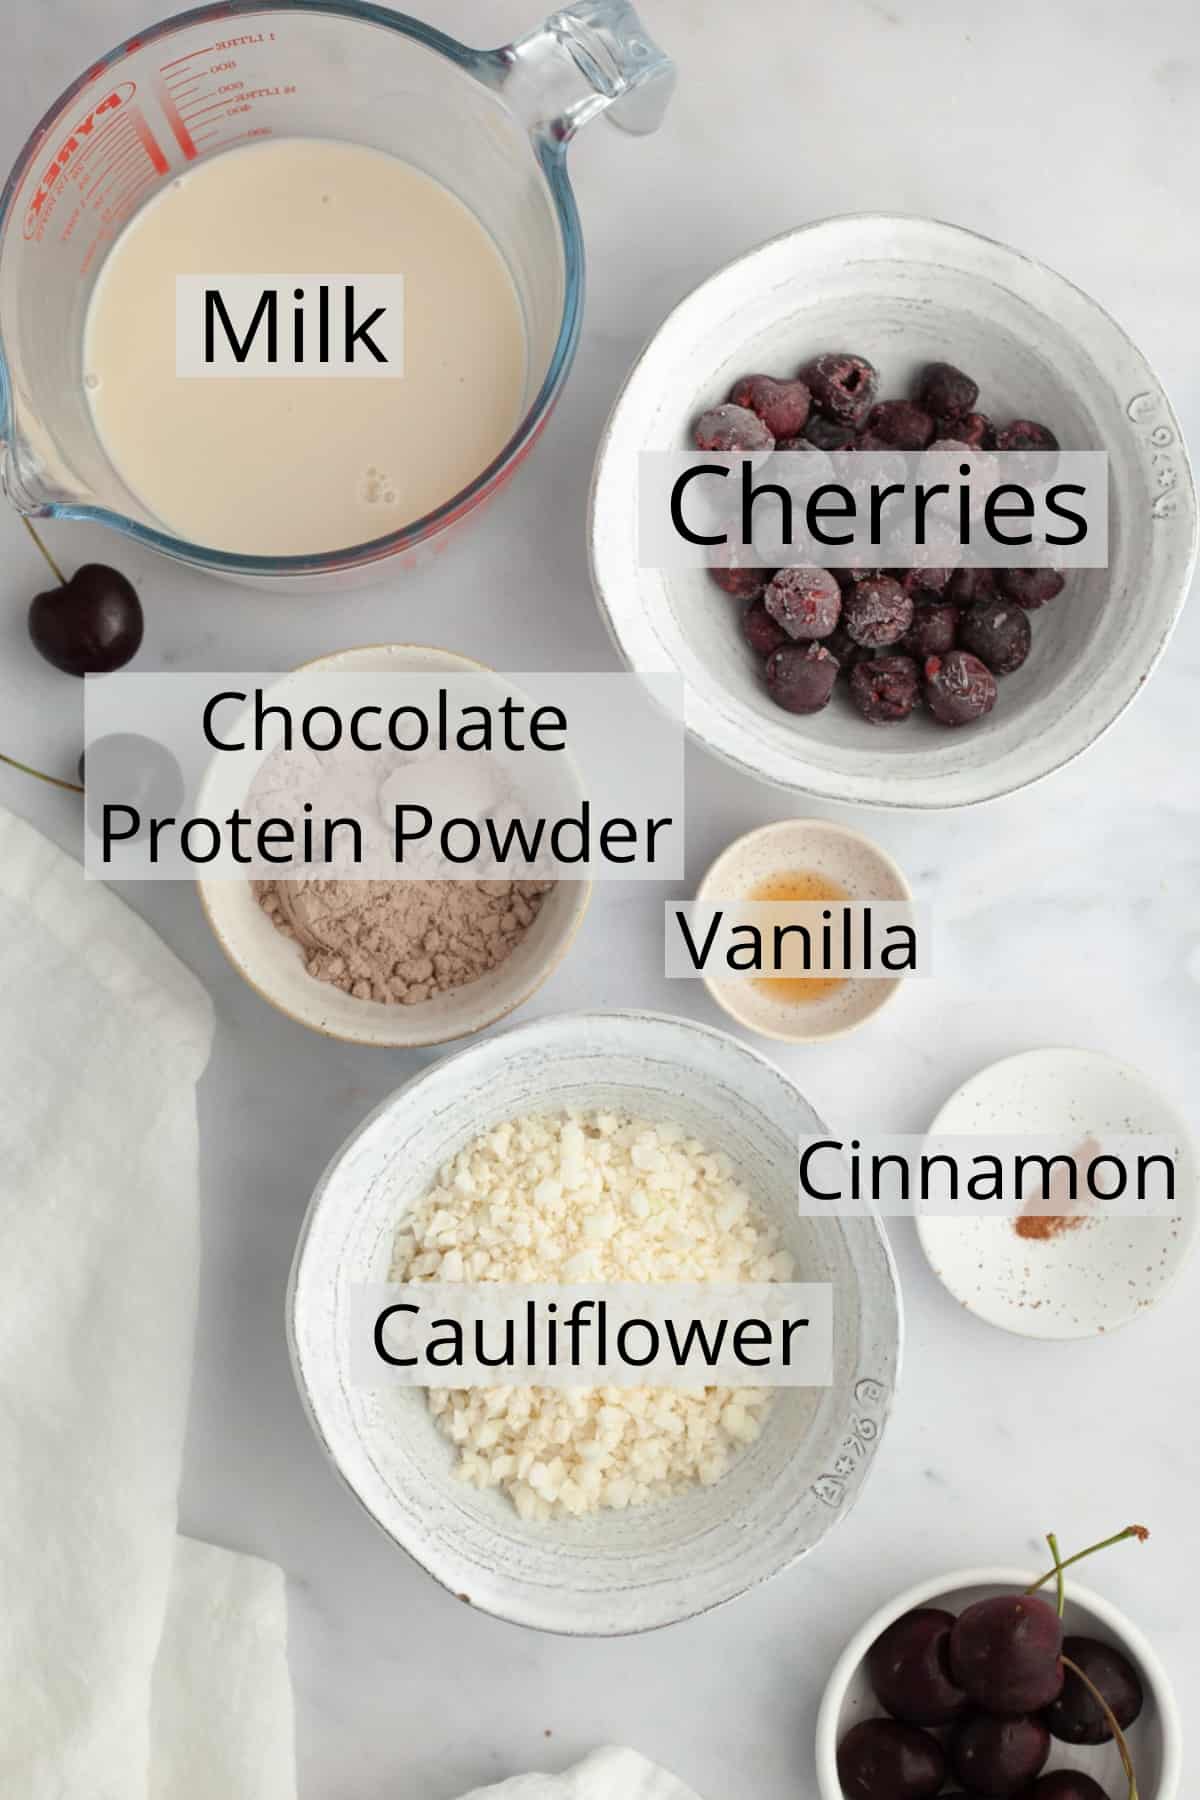 All the ingredients needed to make a chocolate cherry smoothie, weighed out into a small bowl.